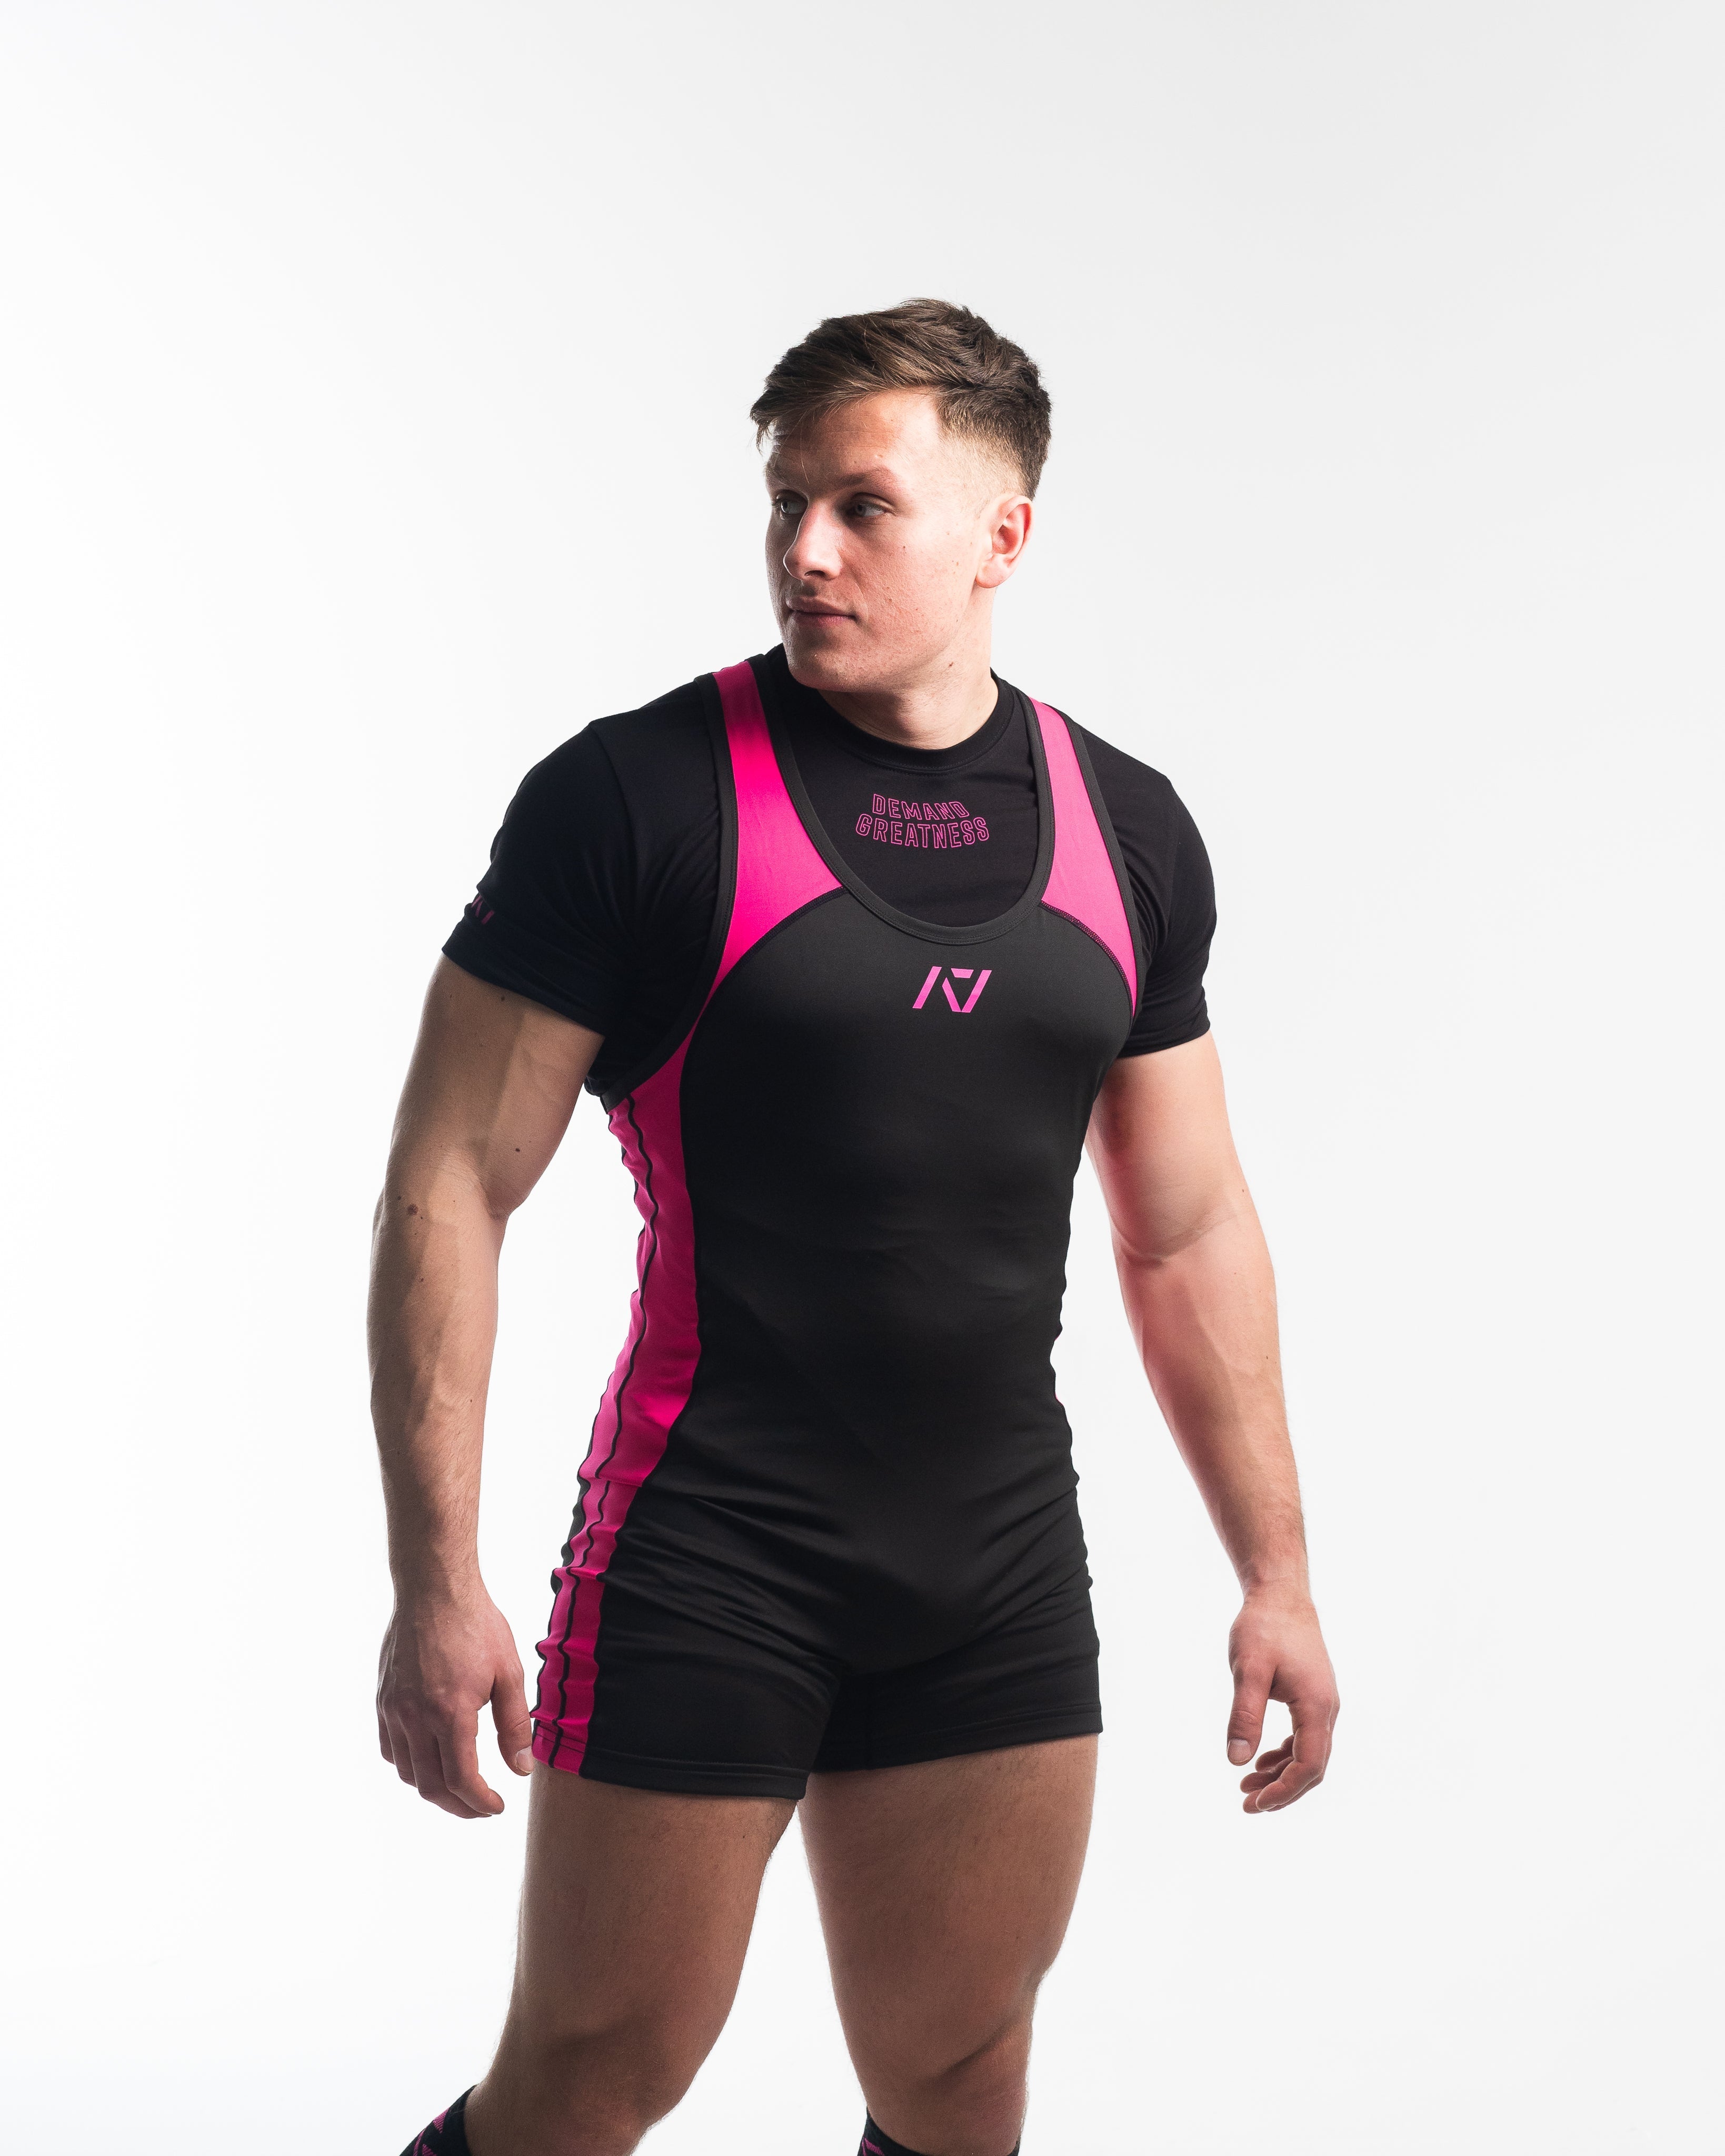 A7 IPF Approved Flamingo Luno singlet with extra lat mobility, side panel stitching to guide the squat depth level and curved panel design for a slimming look. The Women's cut singlet features a tapered waist and additional quad room. The IPF Approved Kit includes Powerlifting Singlet, A7 Meet Shirt, A7 Zebra Wrist Wraps, A7 Deadlift Socks, Hourglass Knee Sleeves (Stiff Knee Sleeves and Rigor Mortis Knee Sleeves). Genouillères powerlifting shipping to France, Spain, Ireland, Germany, Italy, Sweden and EU. 